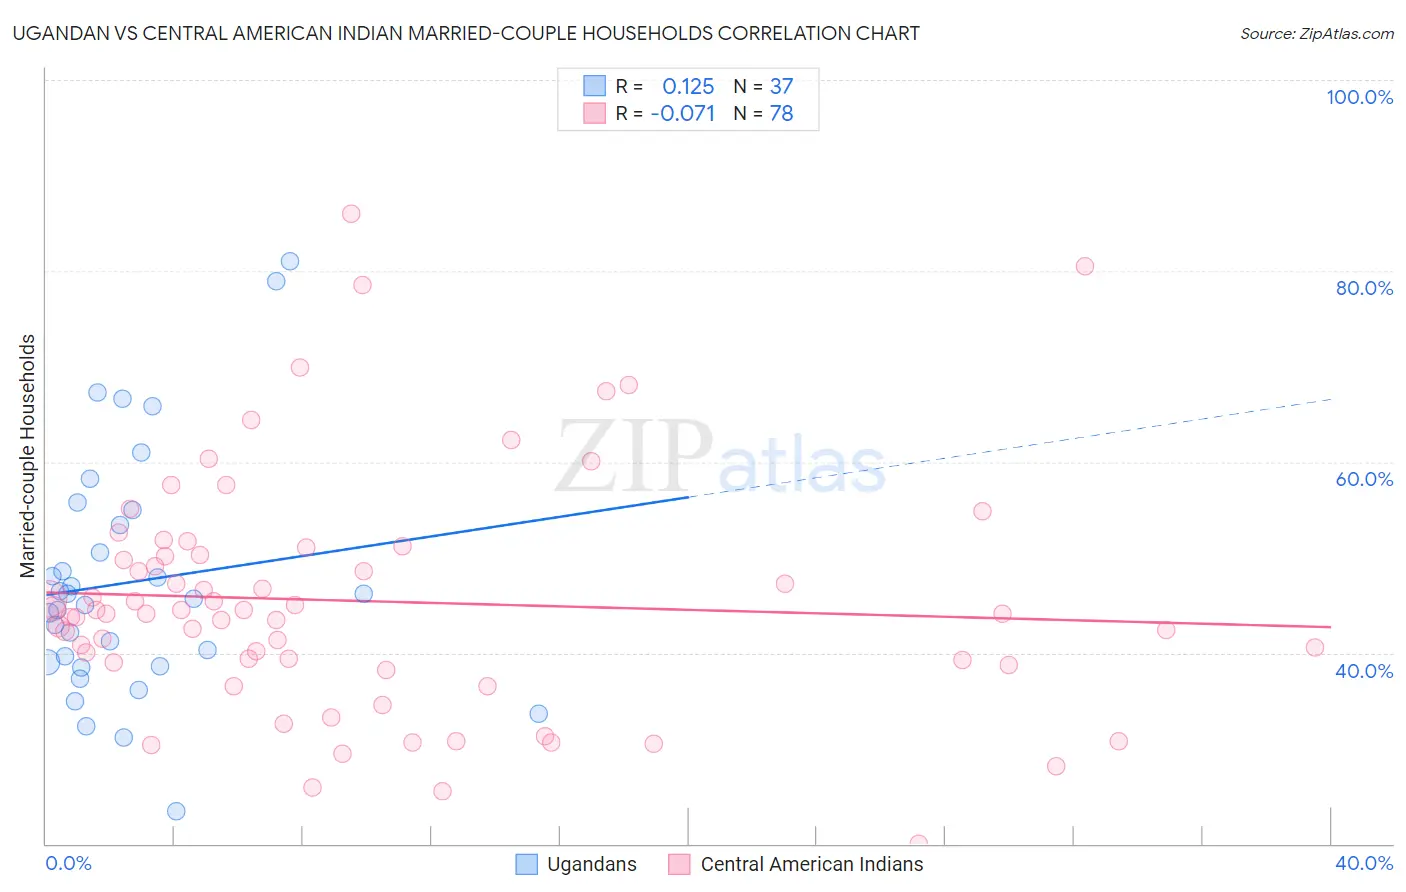 Ugandan vs Central American Indian Married-couple Households